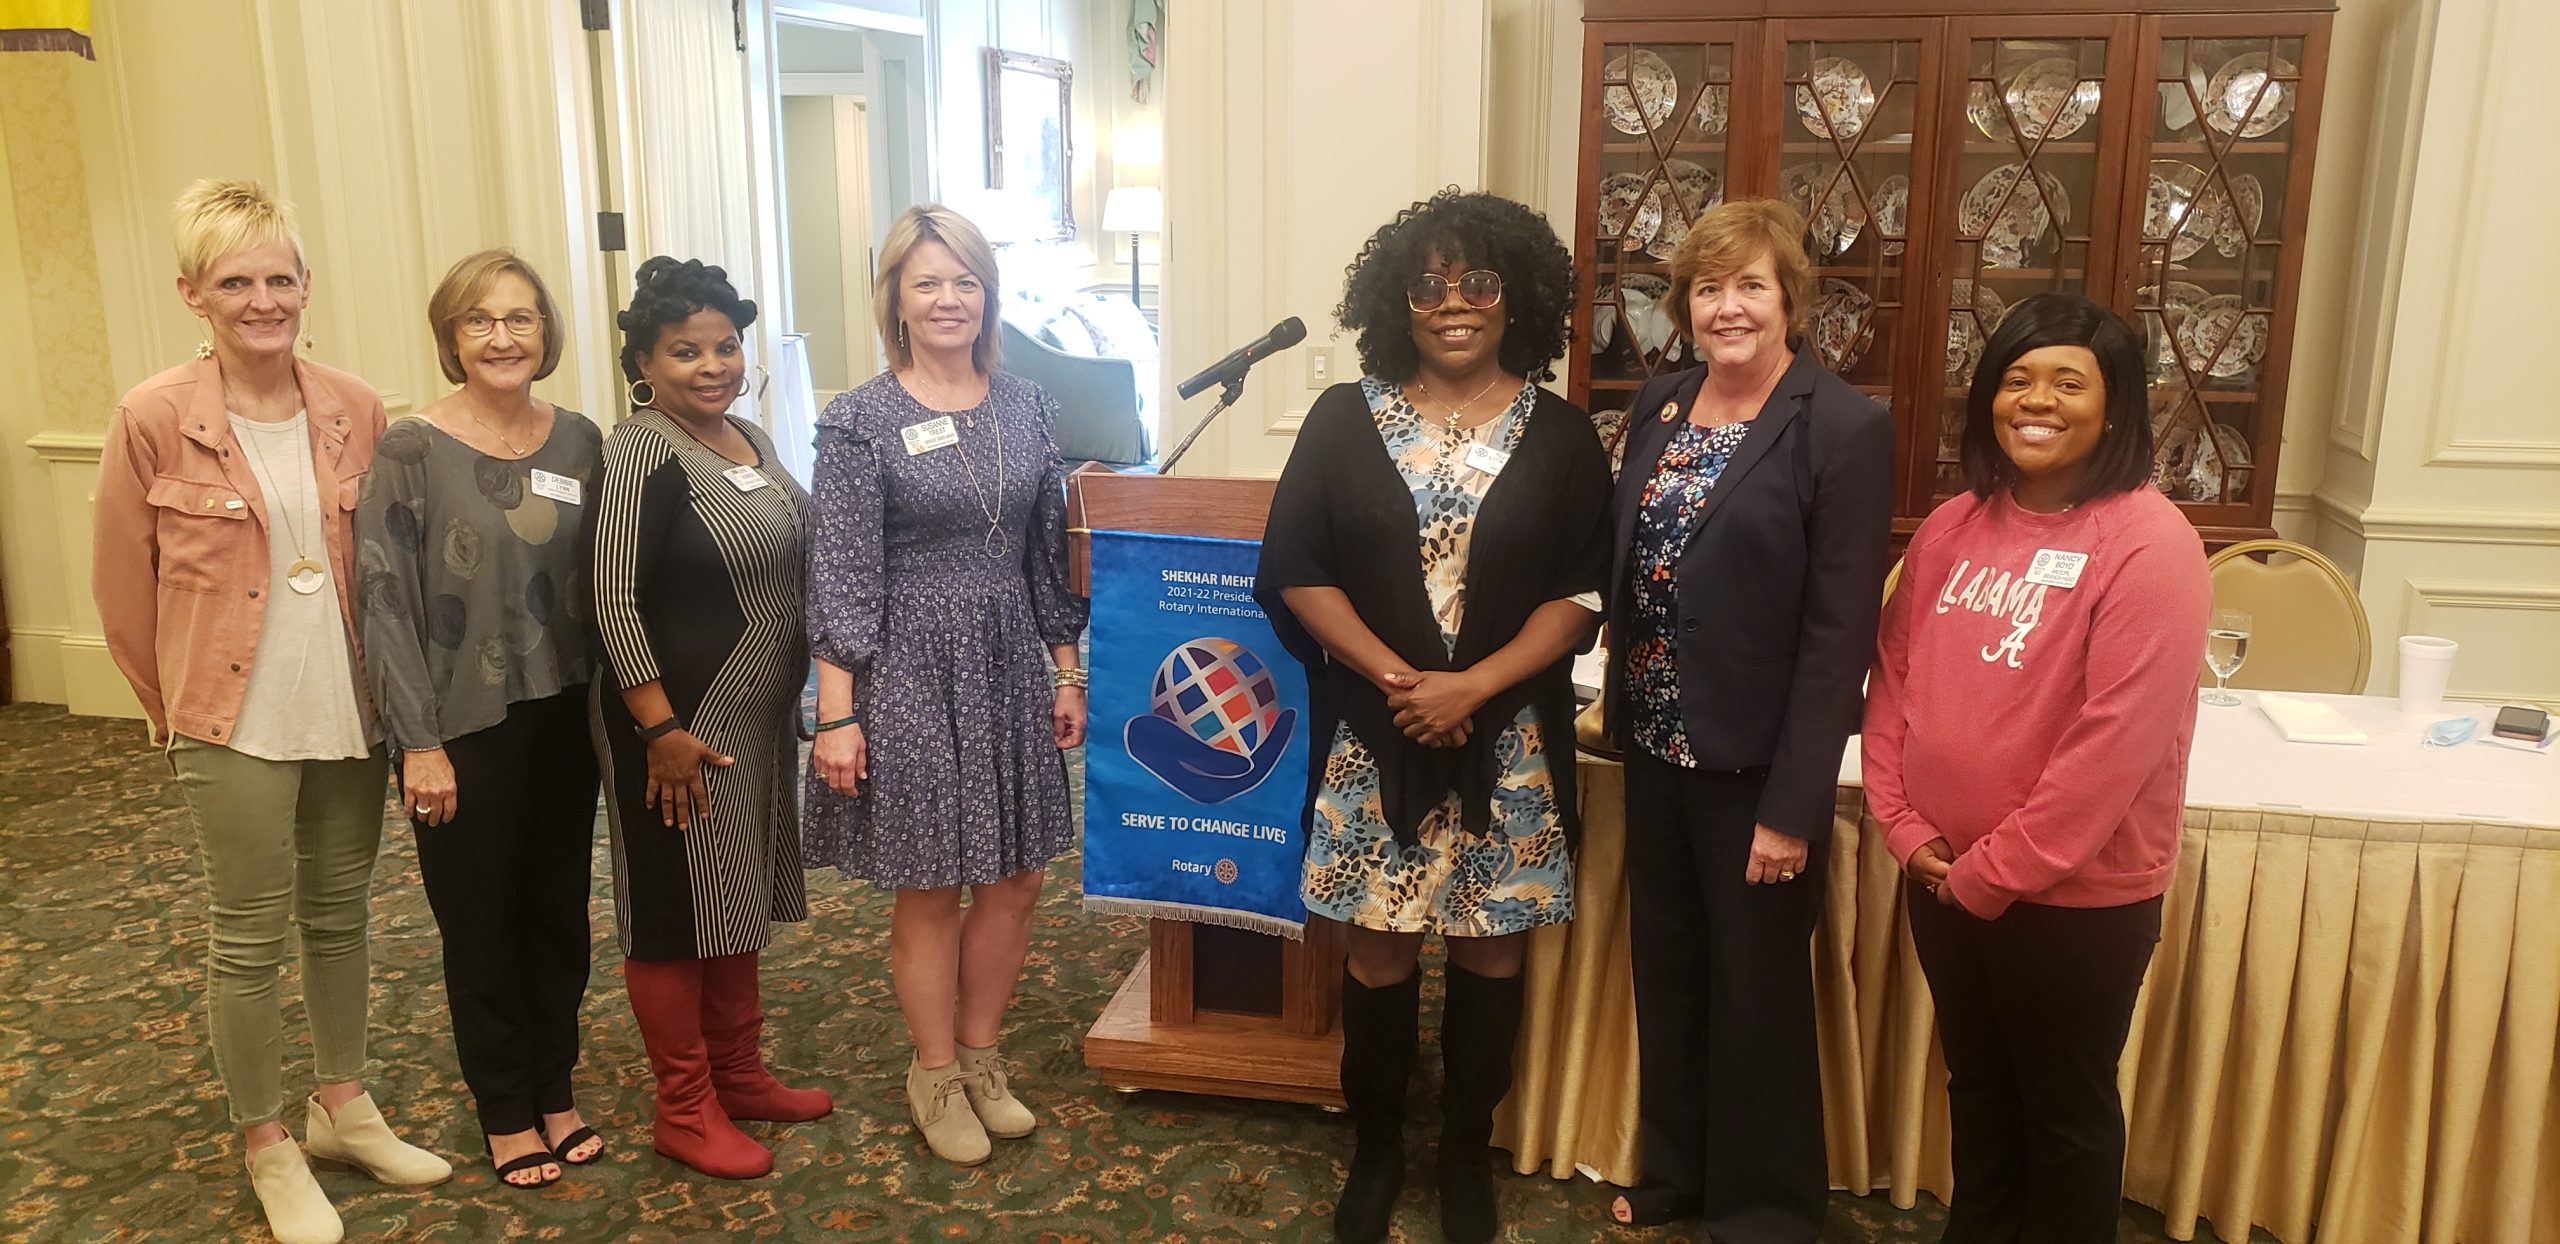 MCRC Women in Rotary